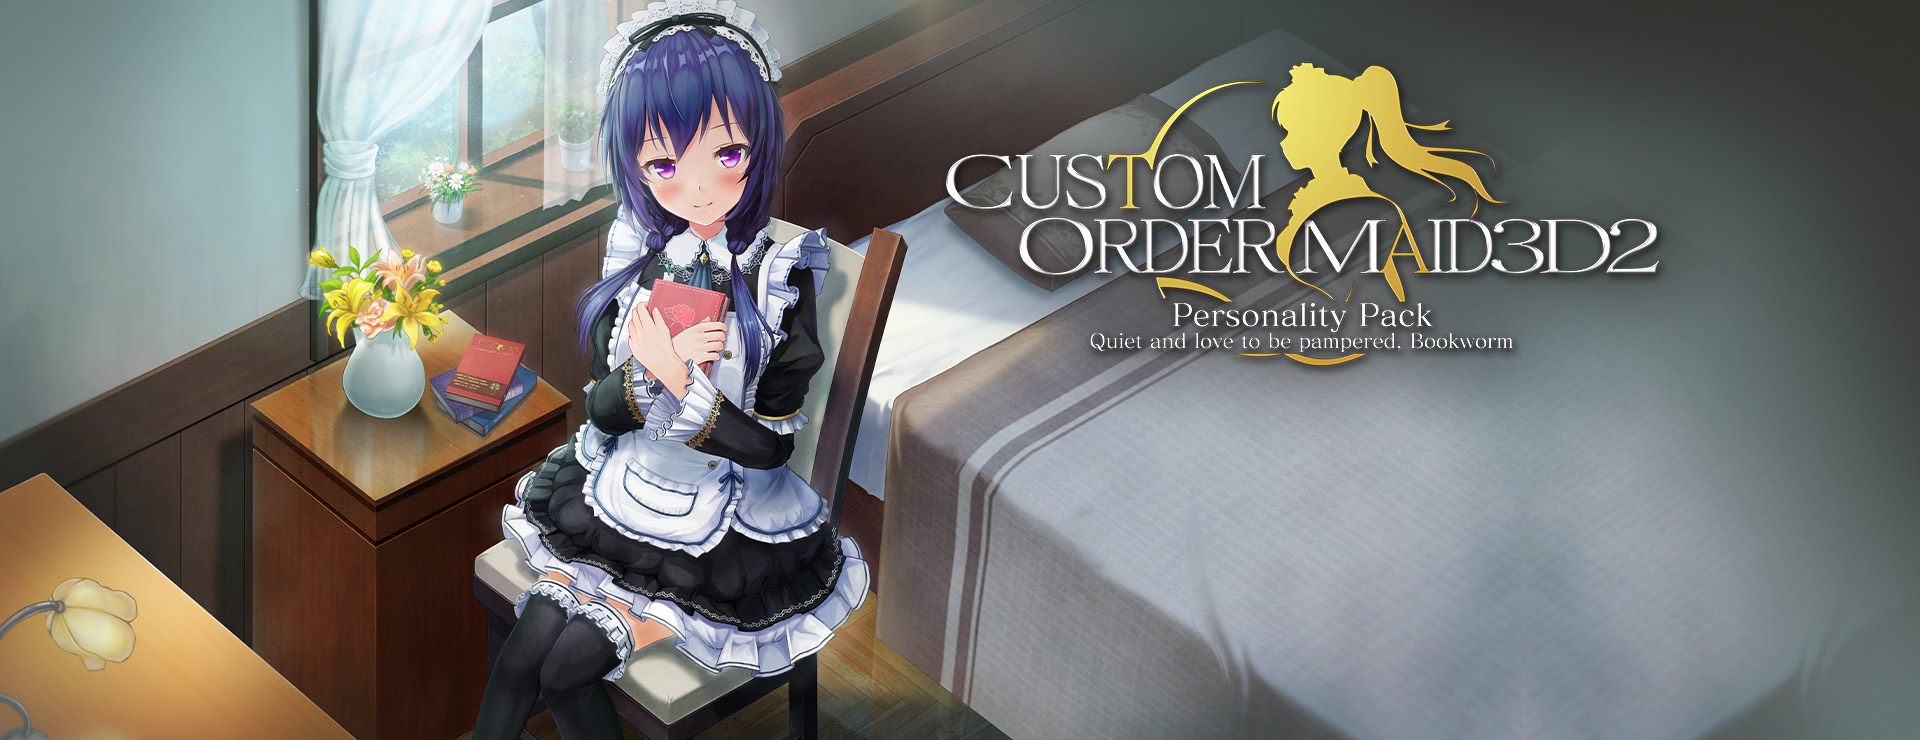 Custom Order Maid 3D2 - Quiet and Love to be Pampered Bookworm DLC - Simulación Juego